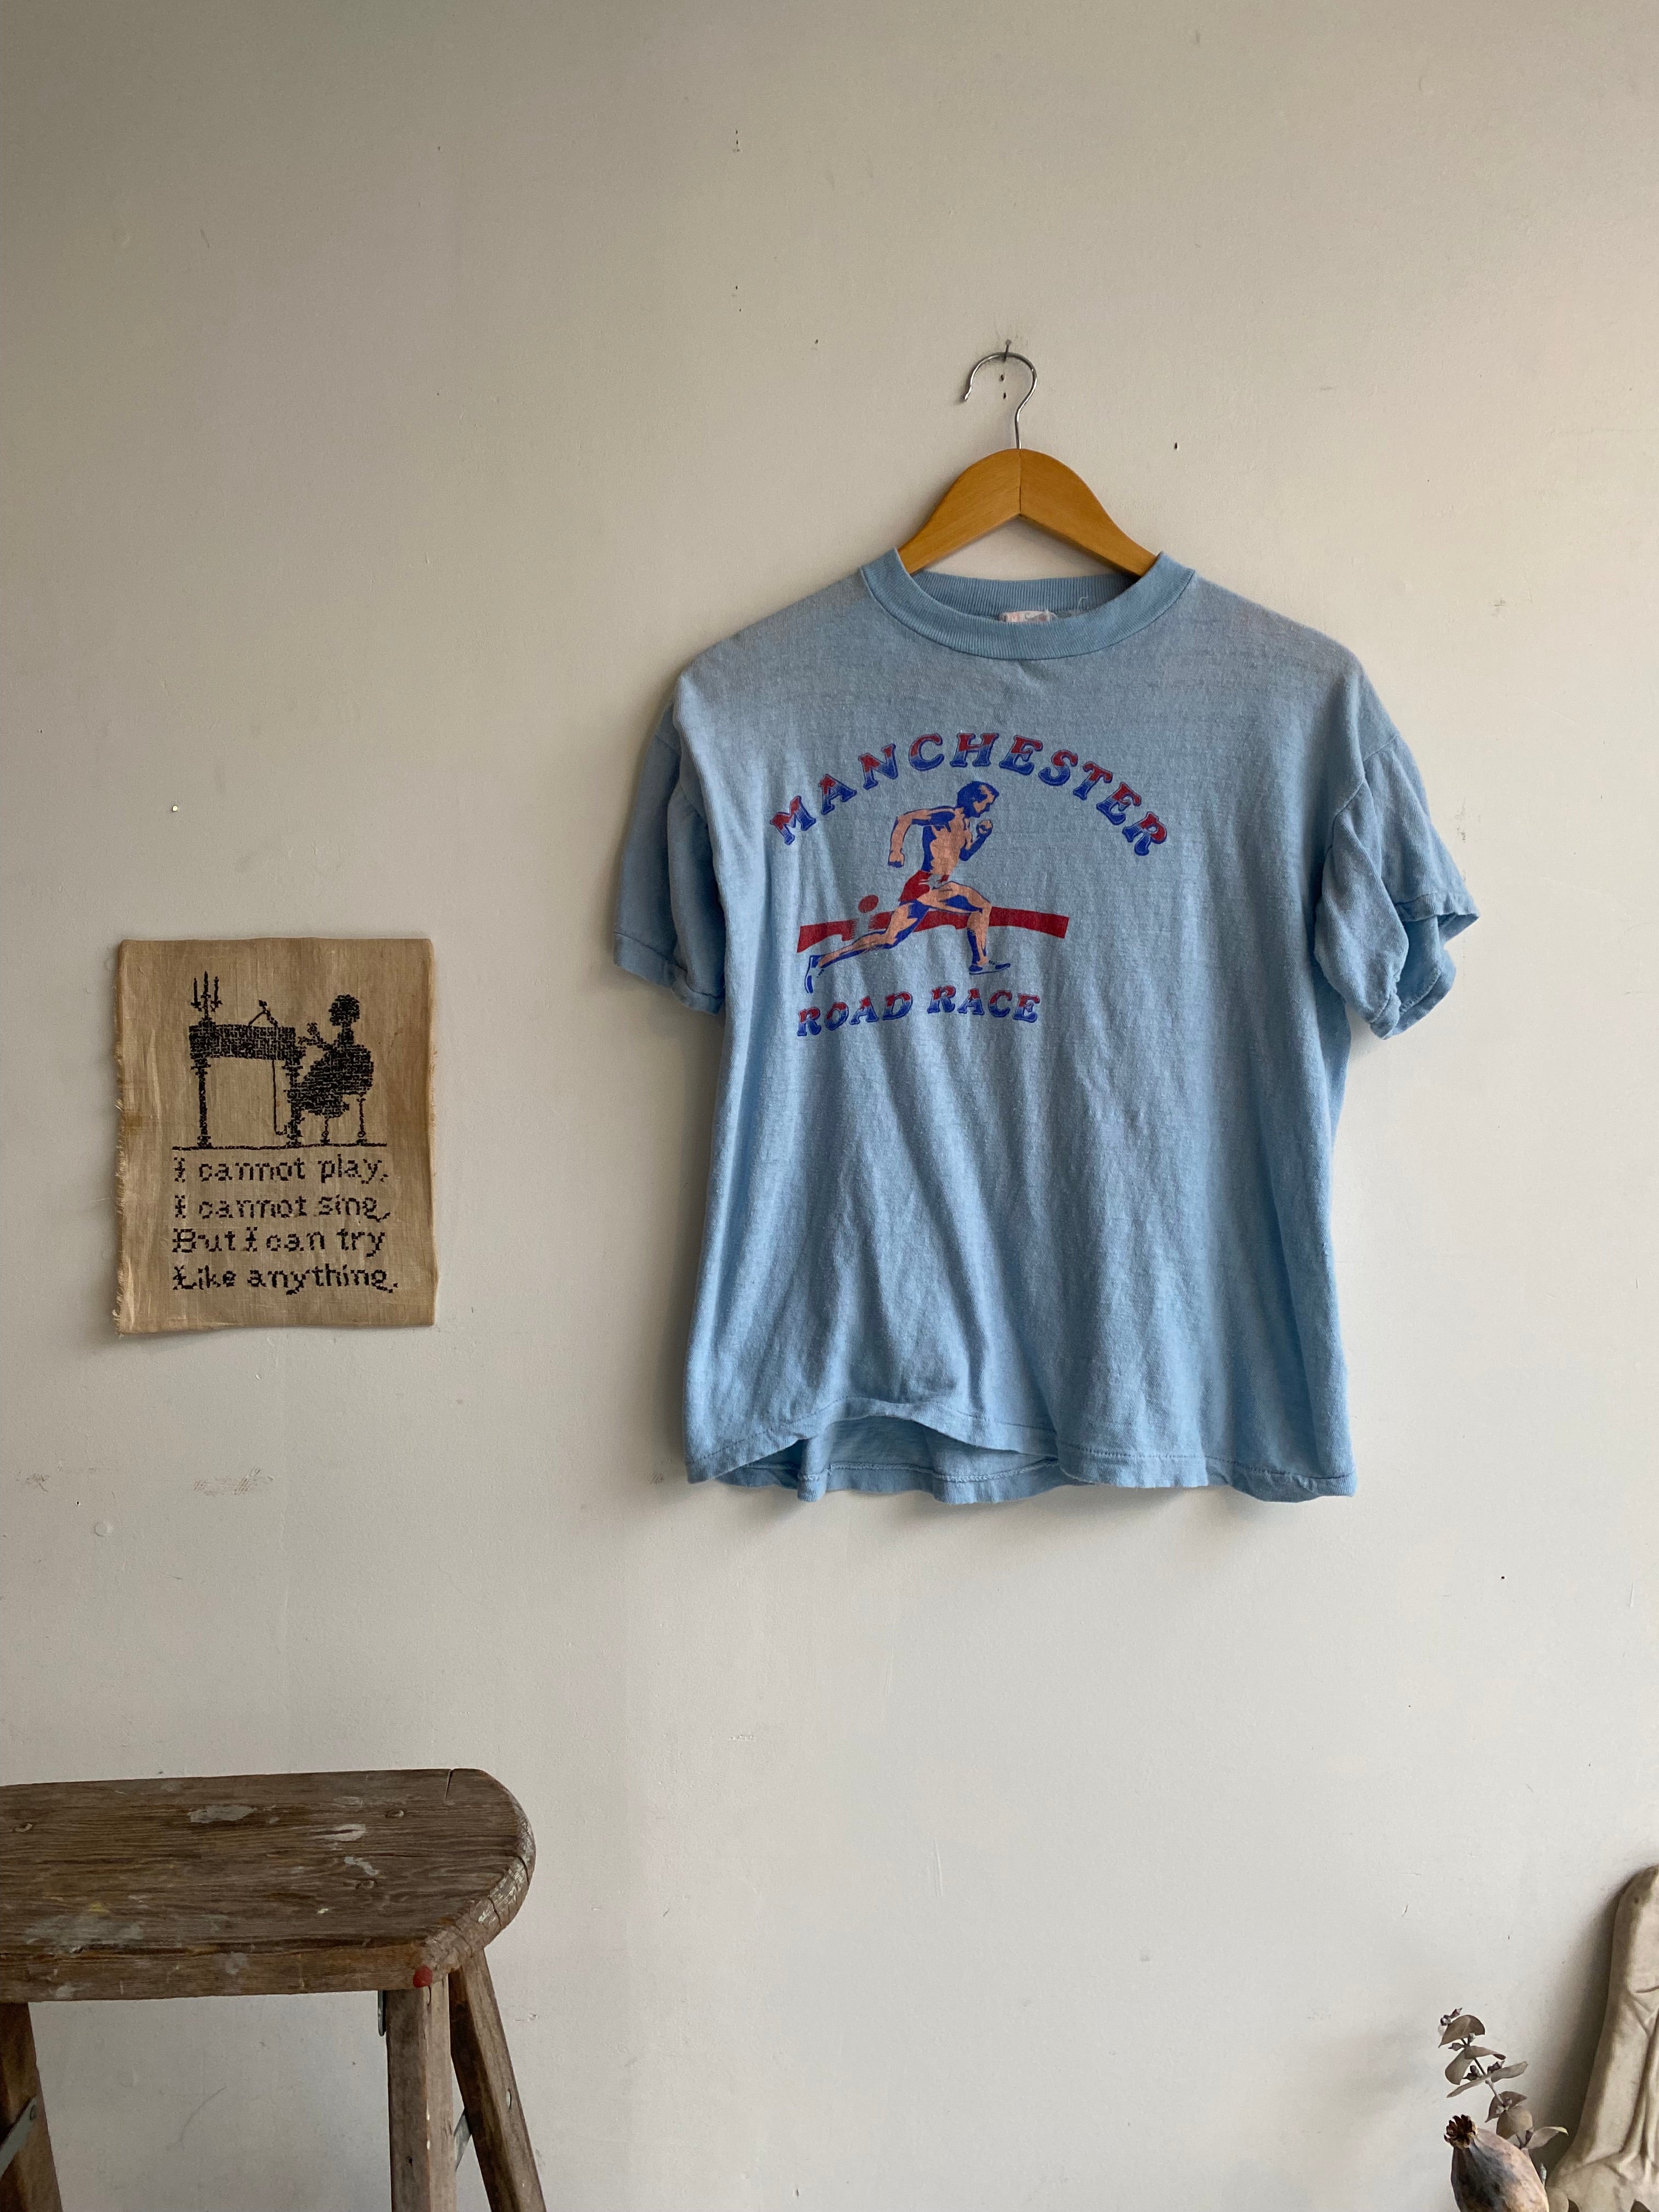 1980s Manchester Road Race Tee (Boxy S)